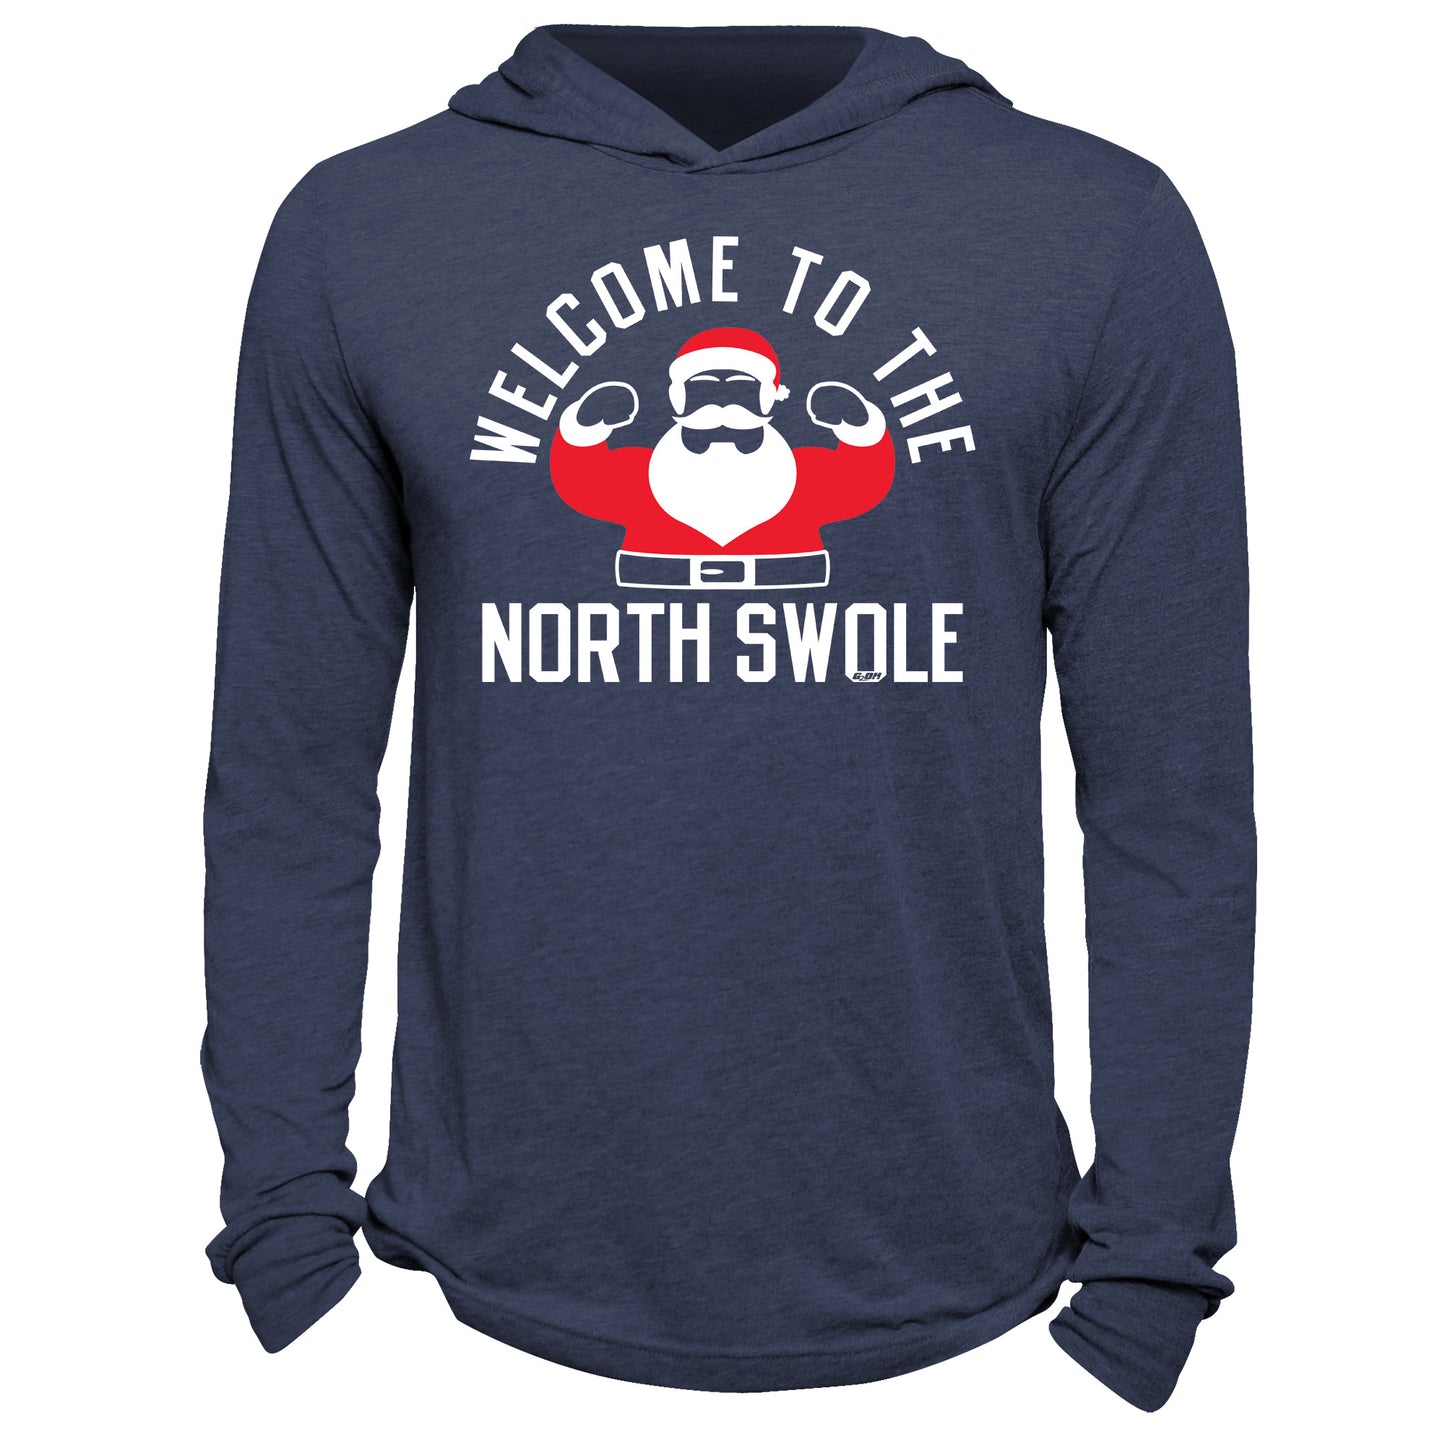 The North Swole Hoodie